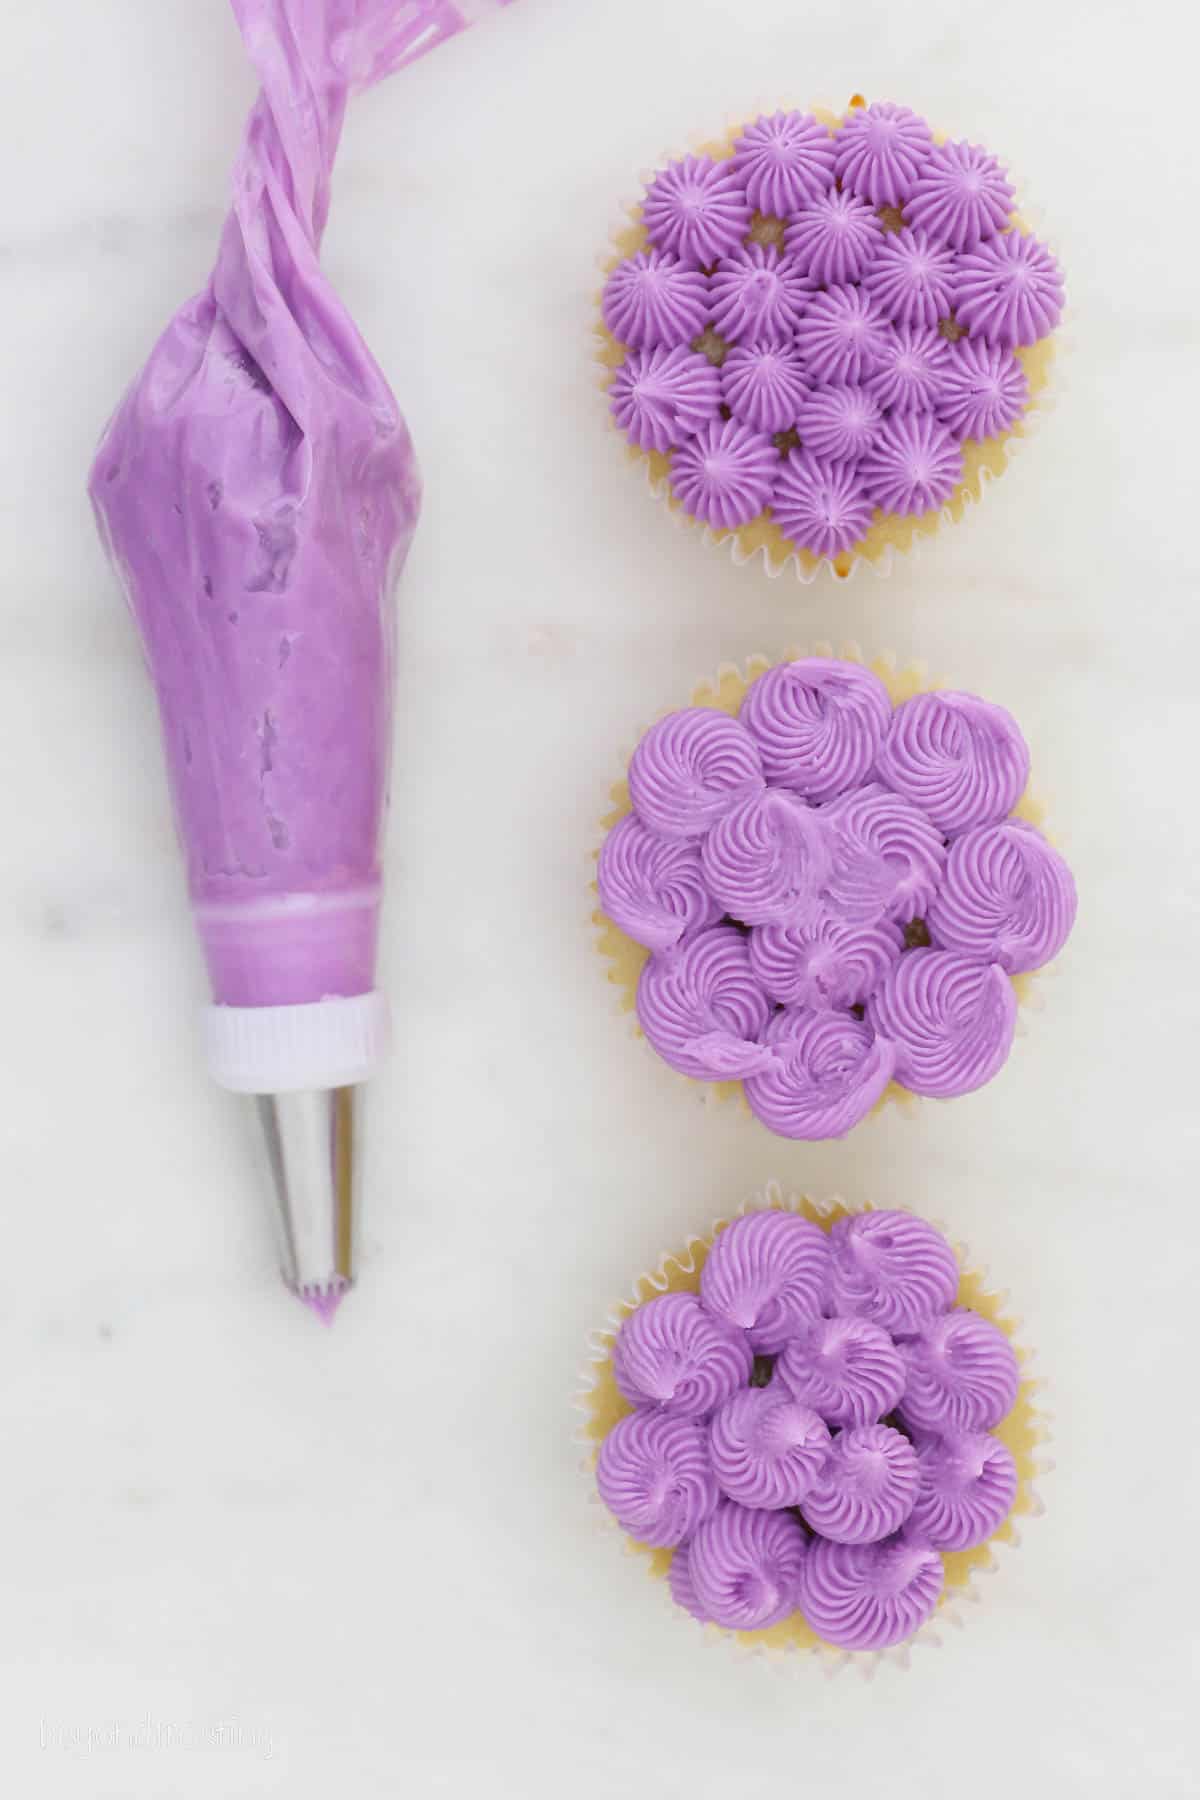 Three cupcakes decorated with purple frosting using various French star piping tips, next to a piping bag of purple buttercream frosting.